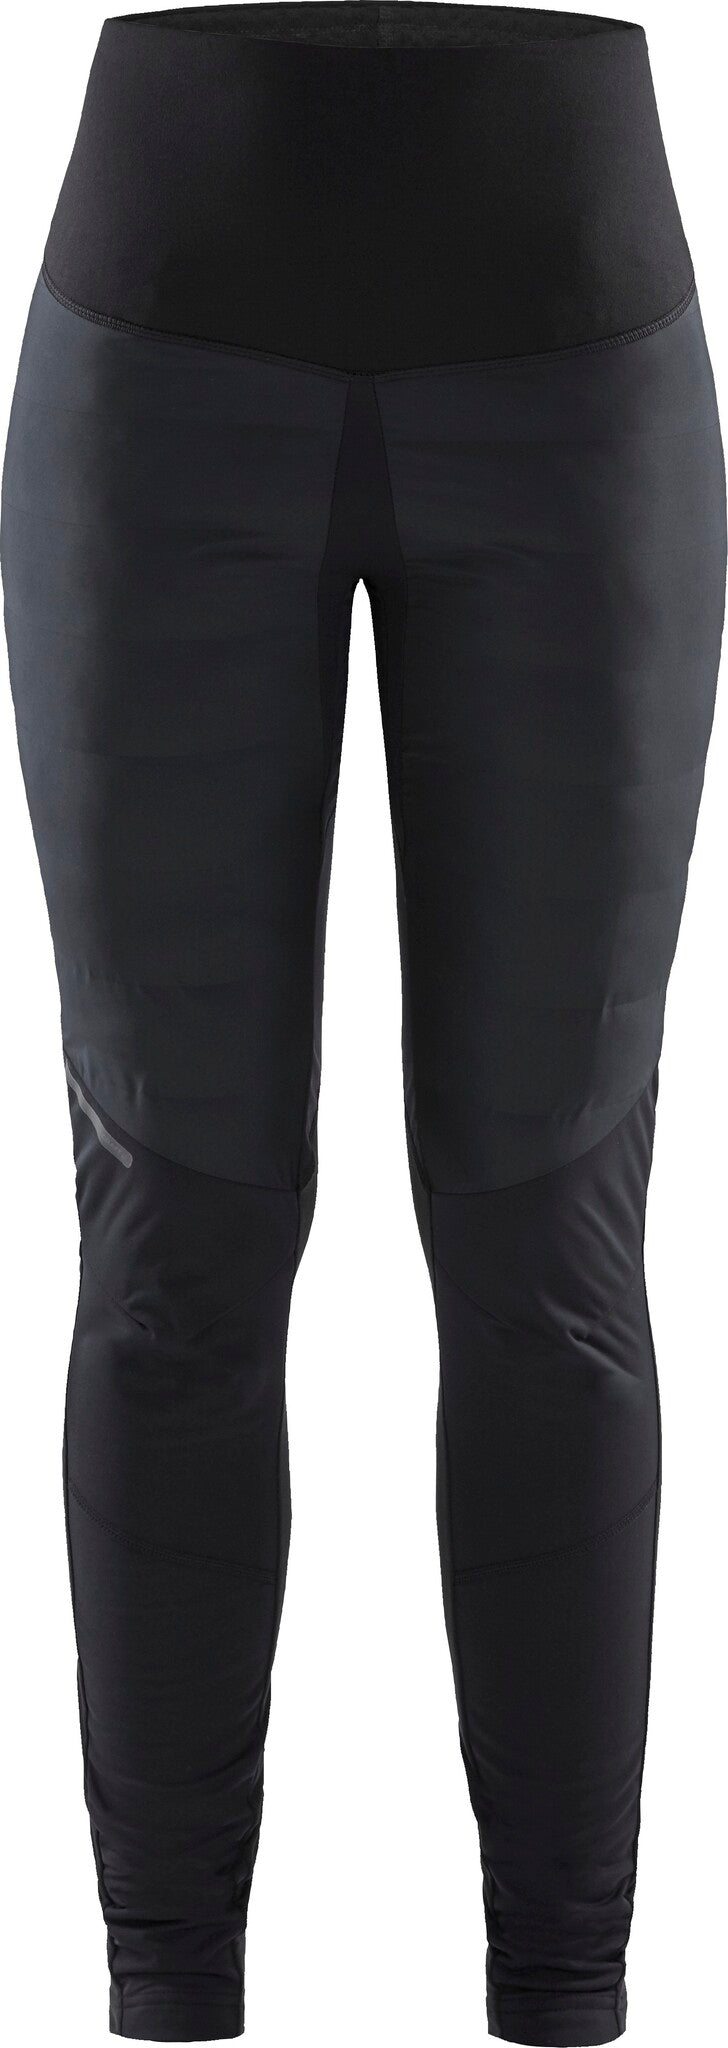 Women's Run Visible Thermal Tight, Running Gear for Women